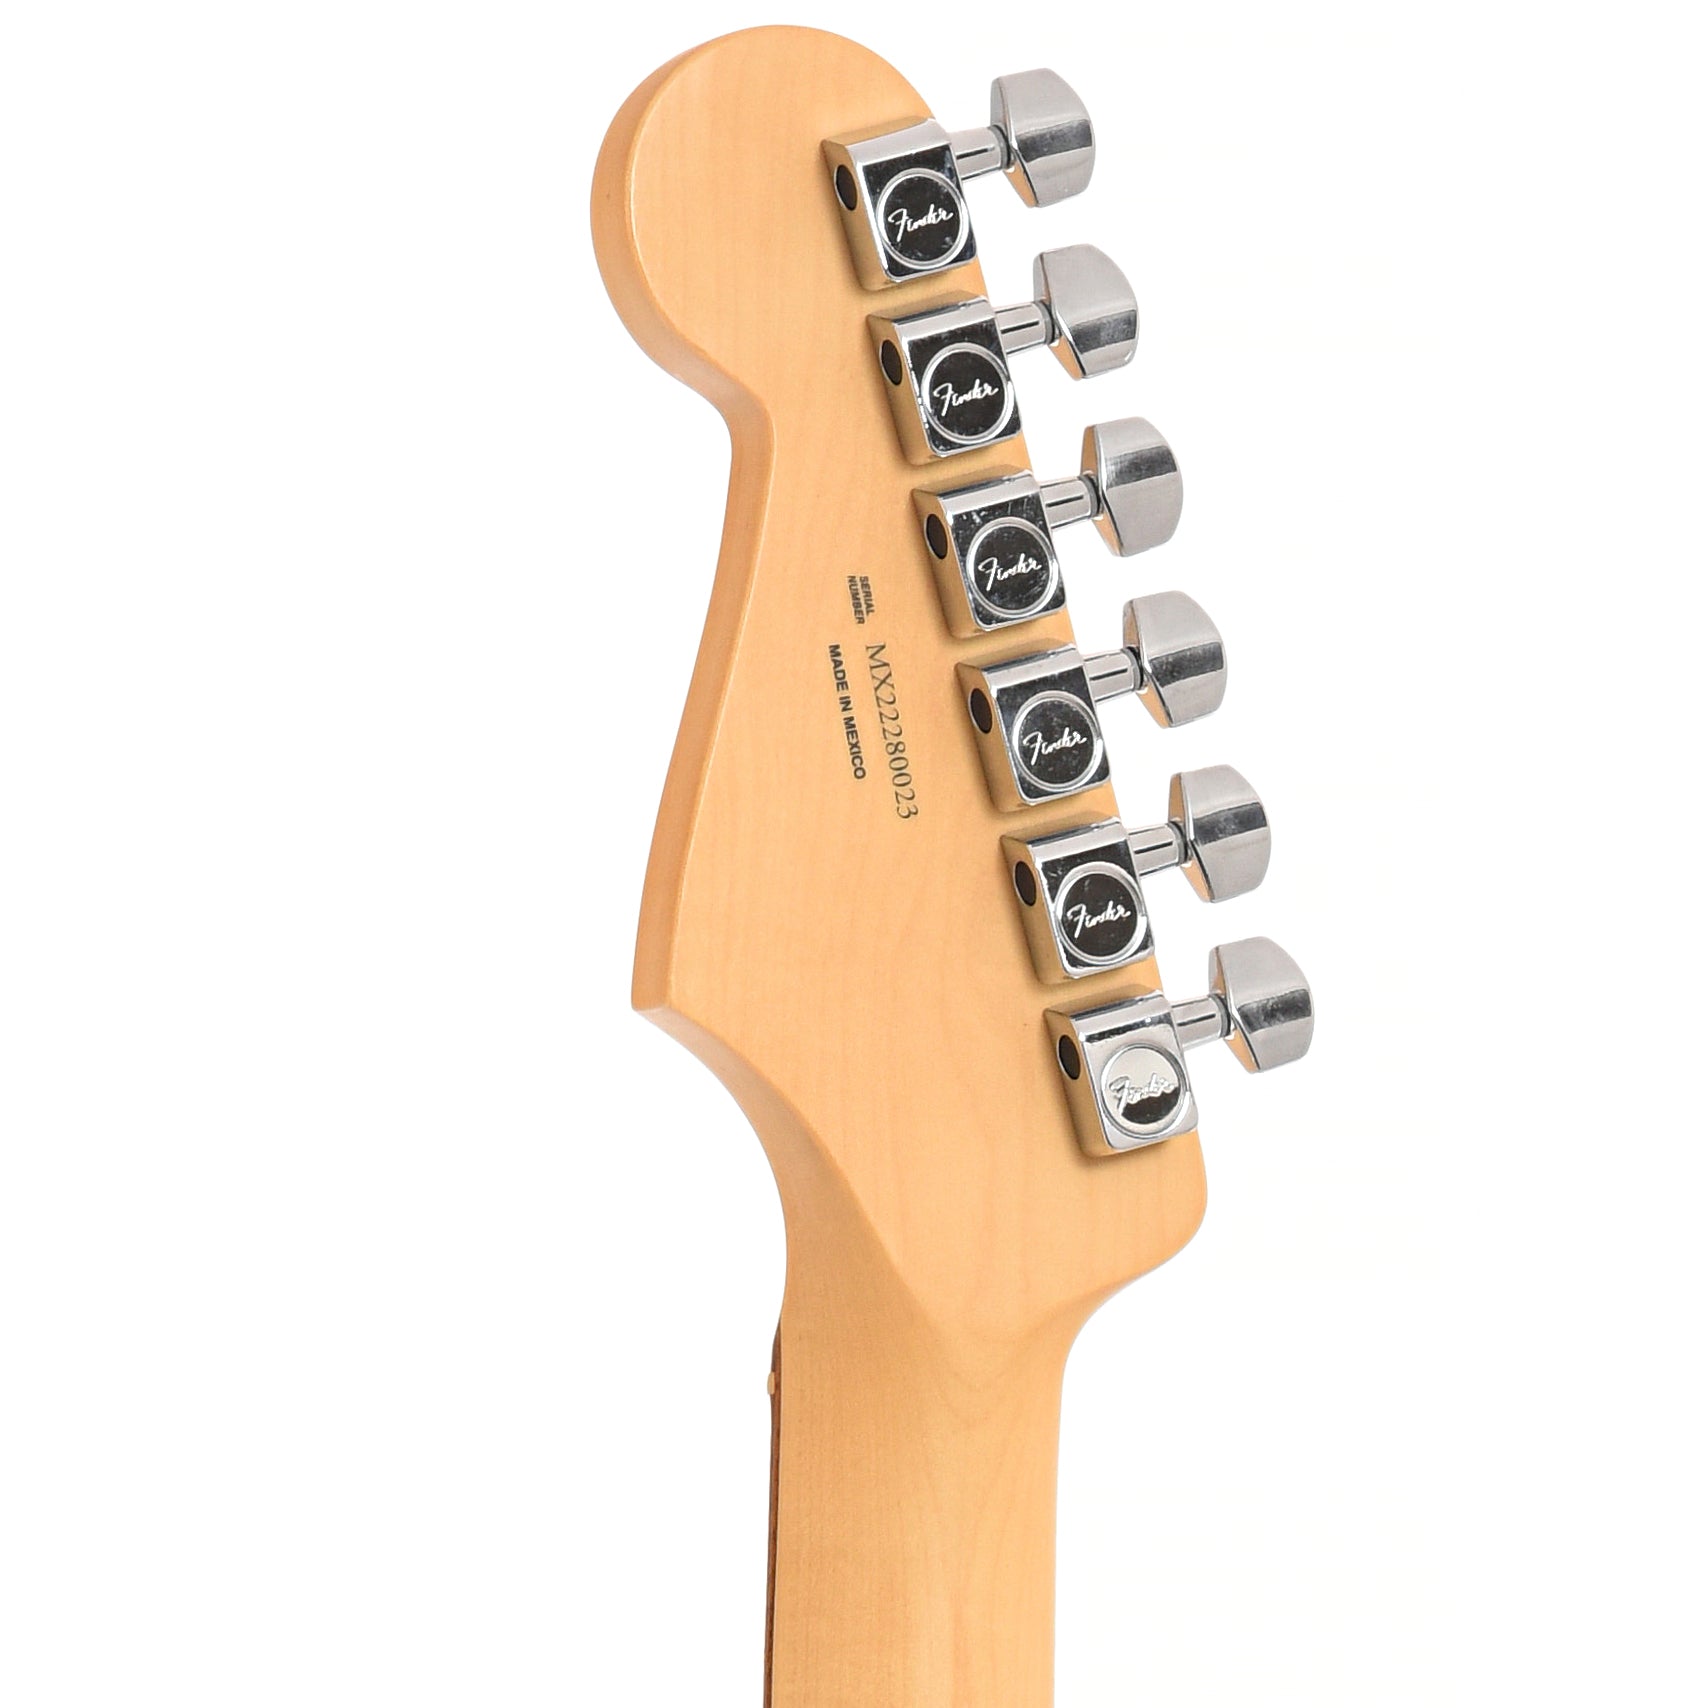 Back heradstock of Fender Player Stratocaster Electric Guitar